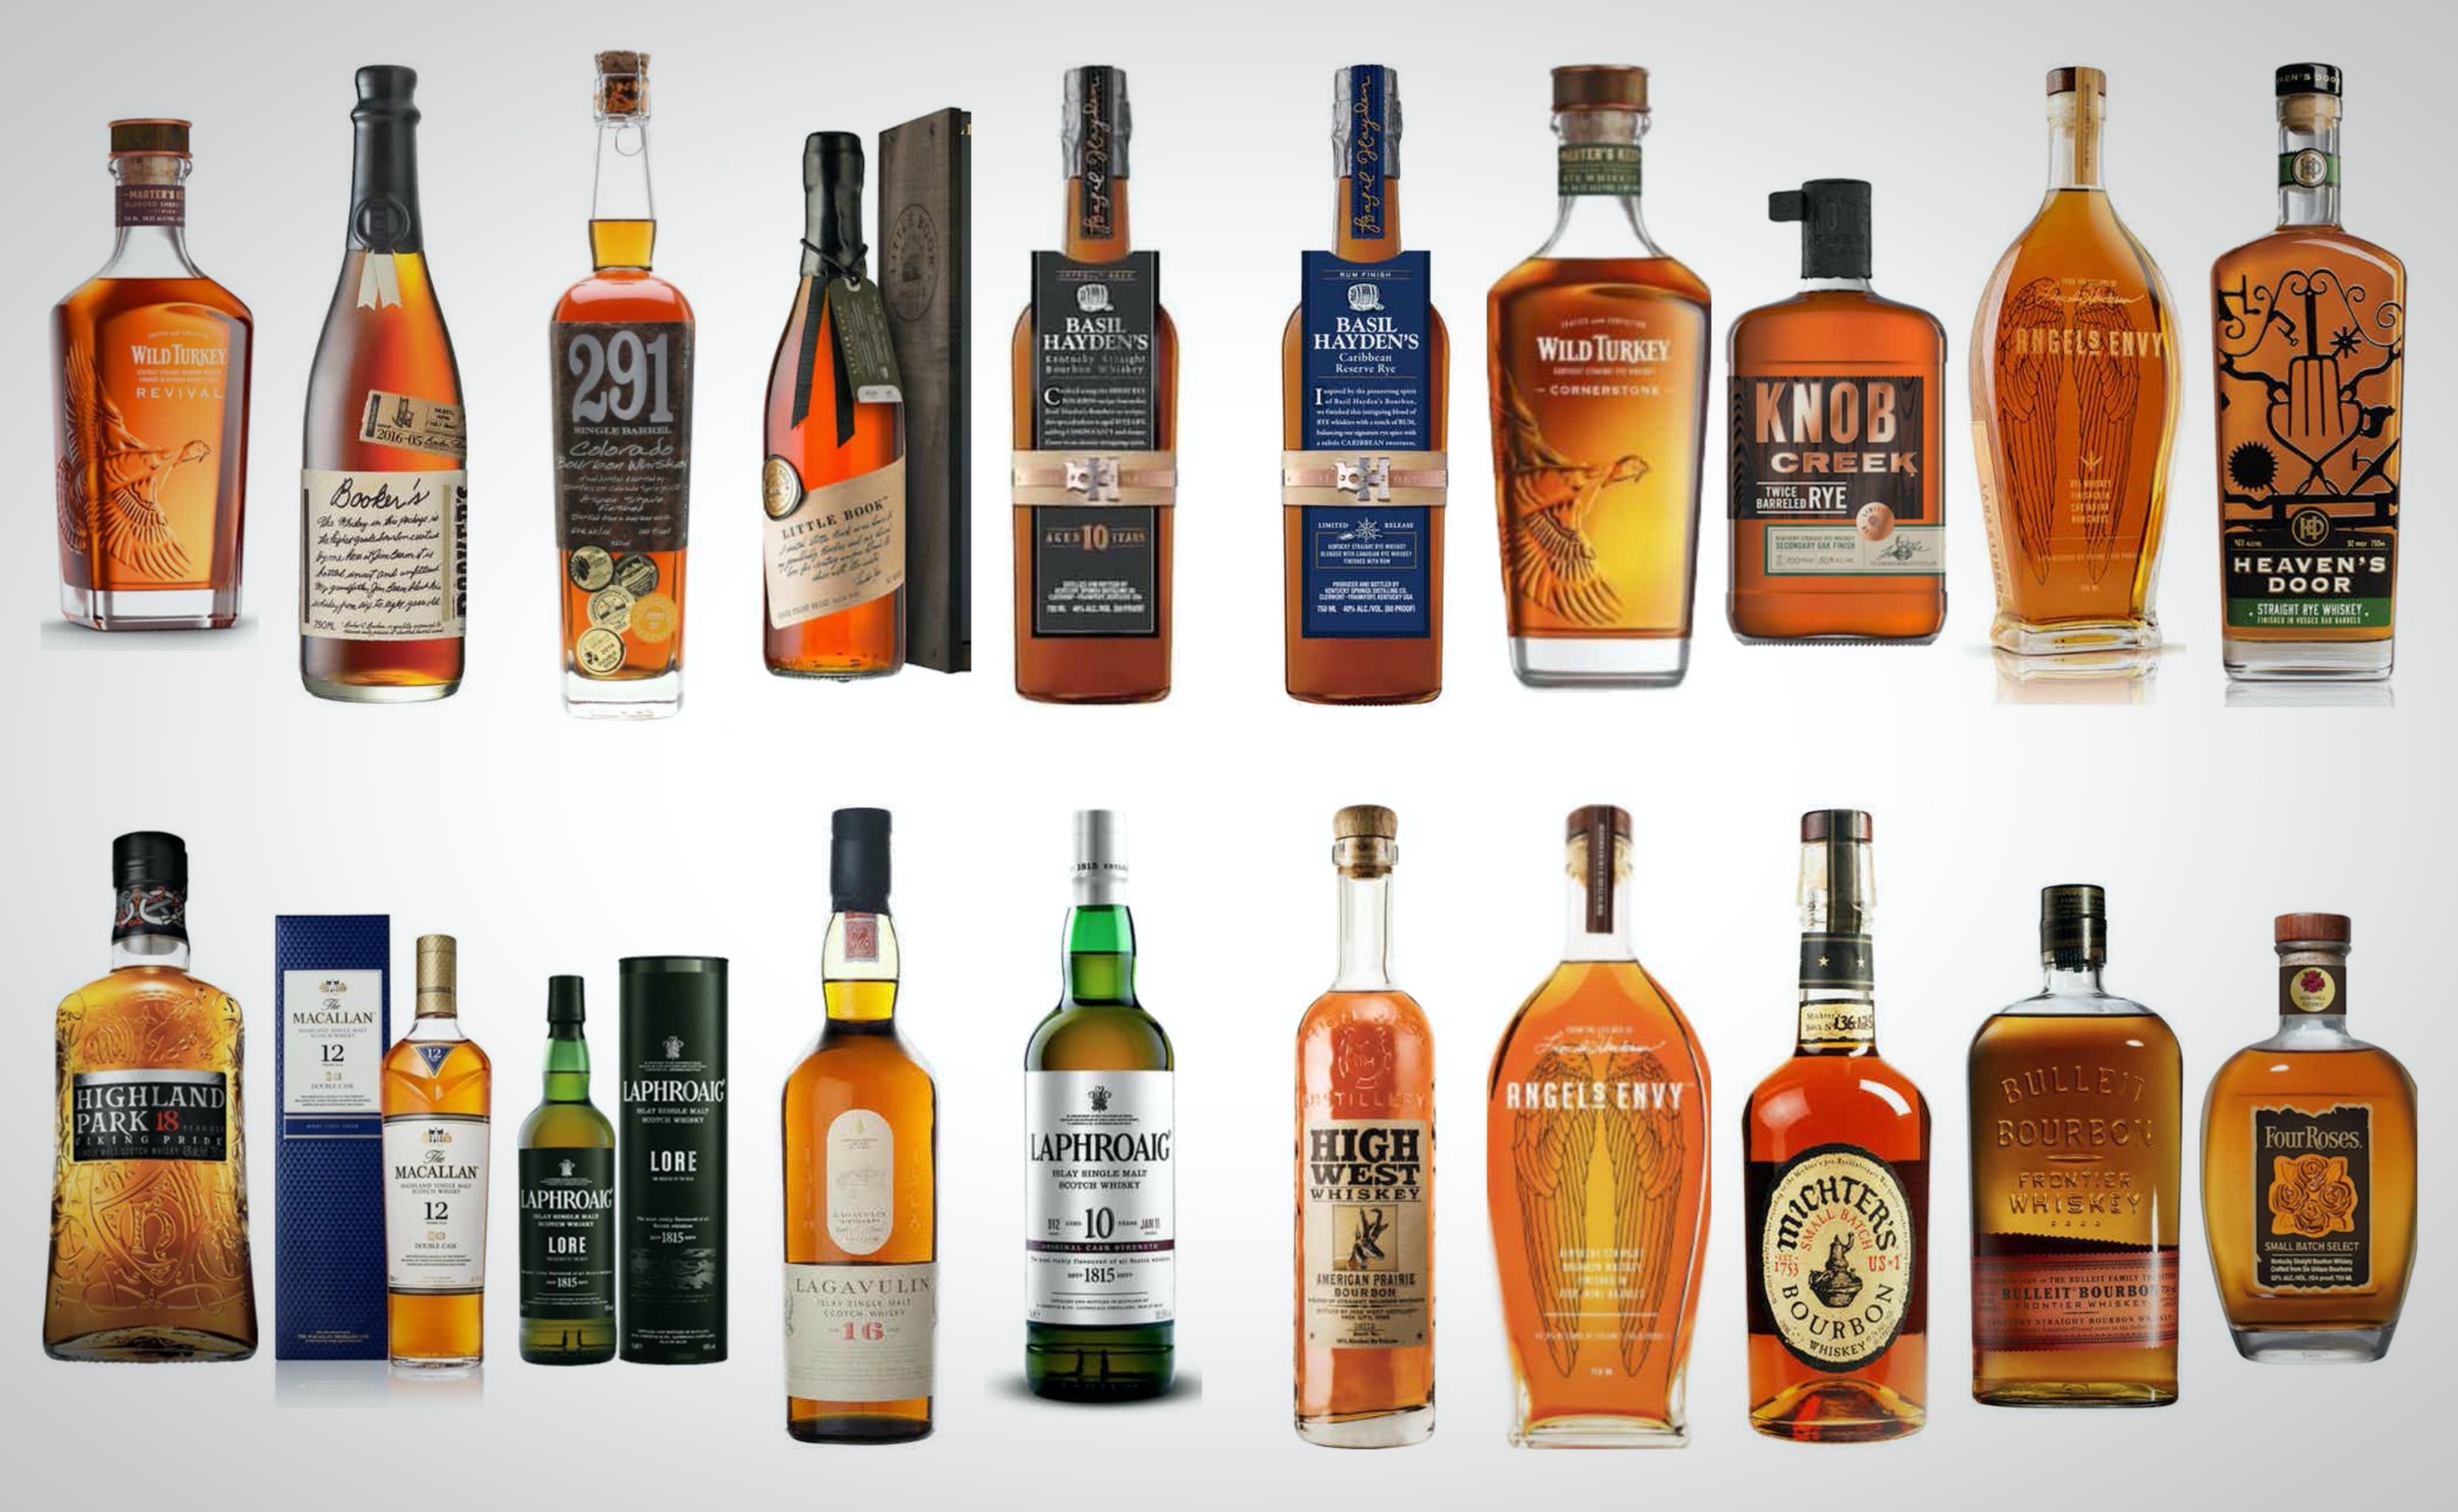 Whisky brands and prices